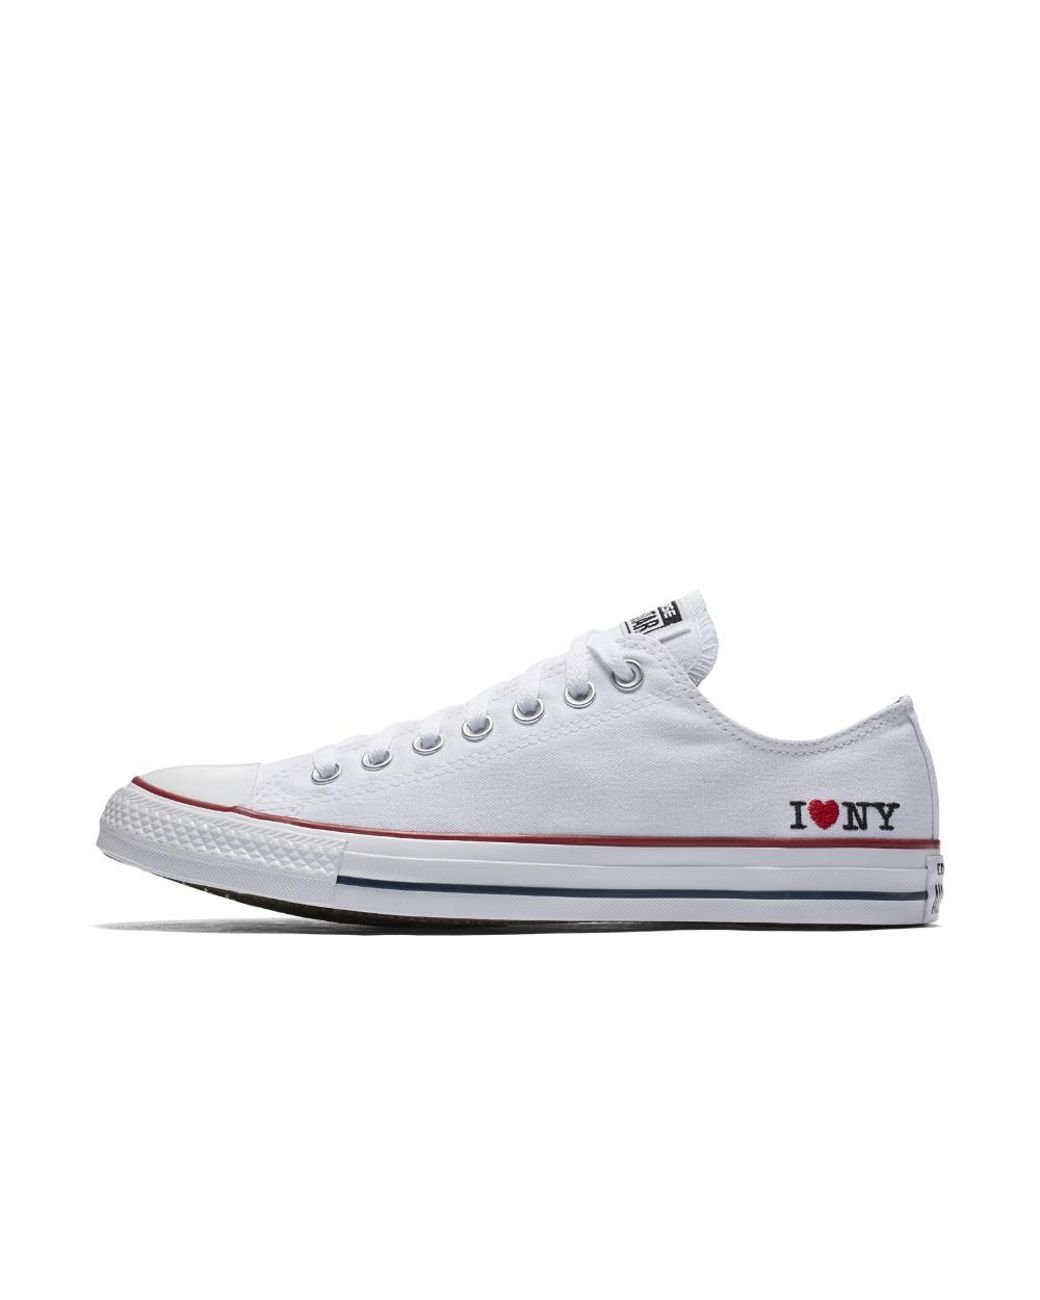 Converse Chuck Taylor All Star I Love Ny Low Top Shoes White Size 9.5 11.5  | Lyst